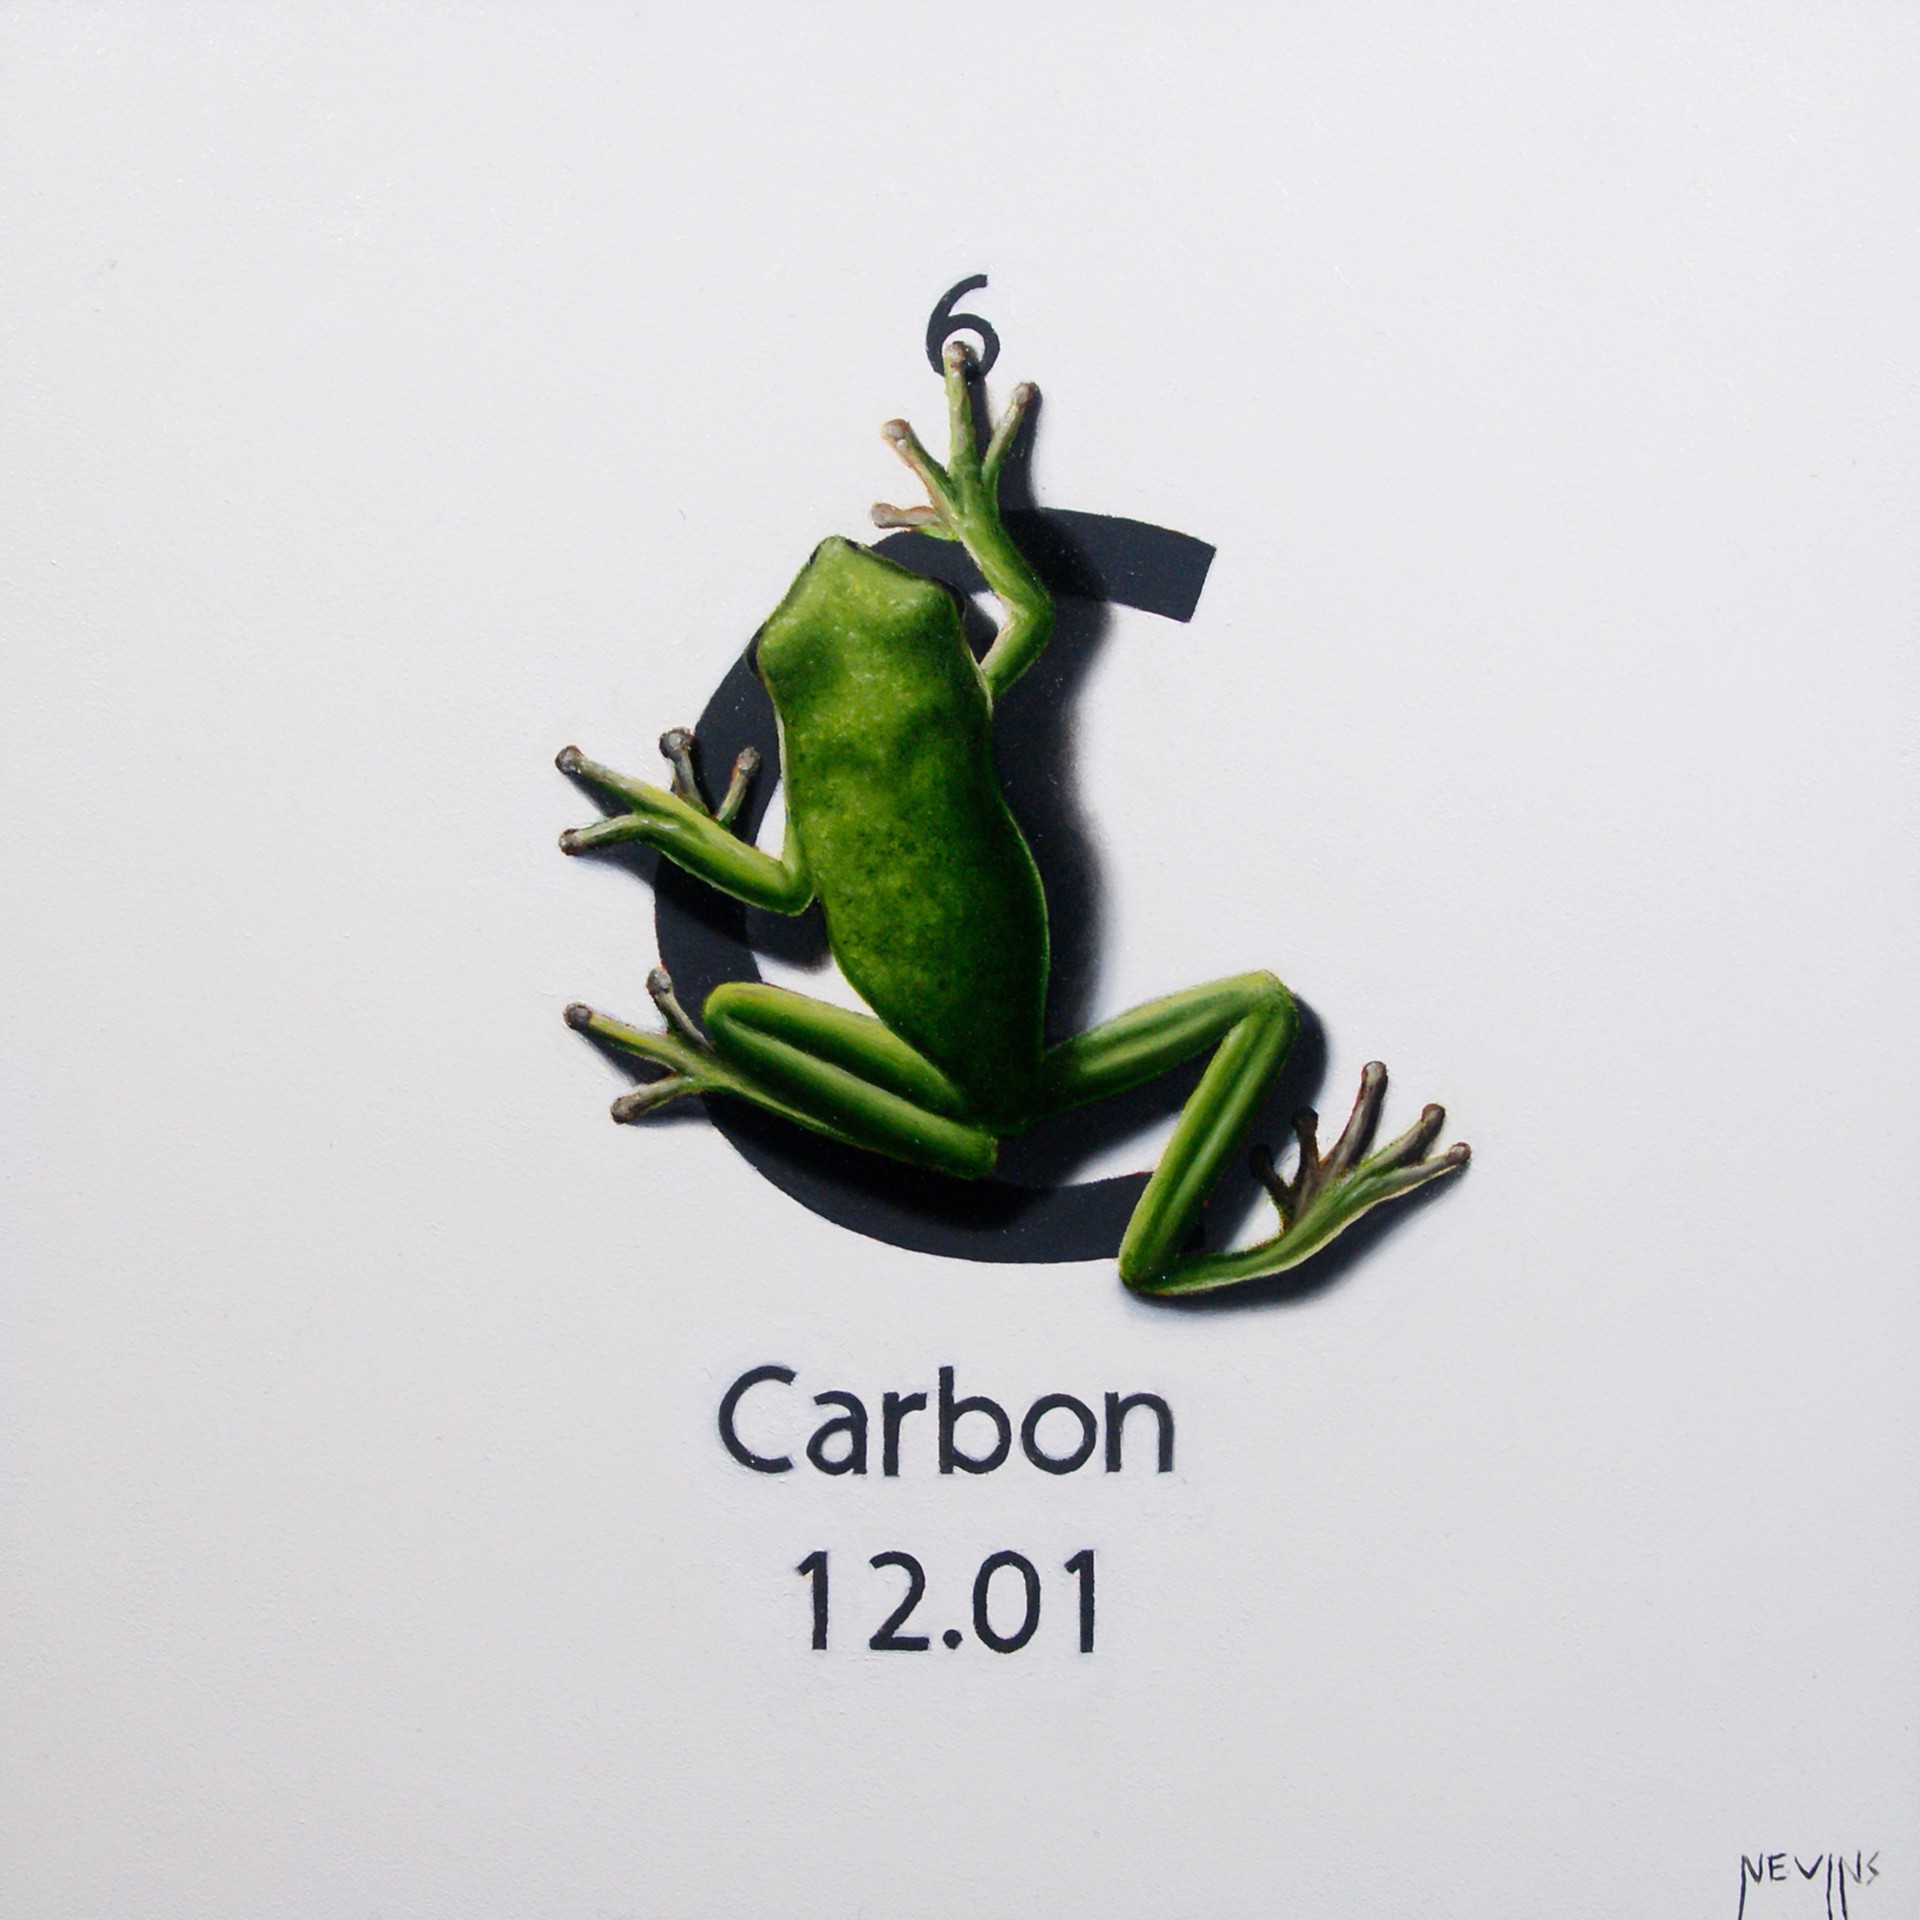 Carbon by Patrick Nevins